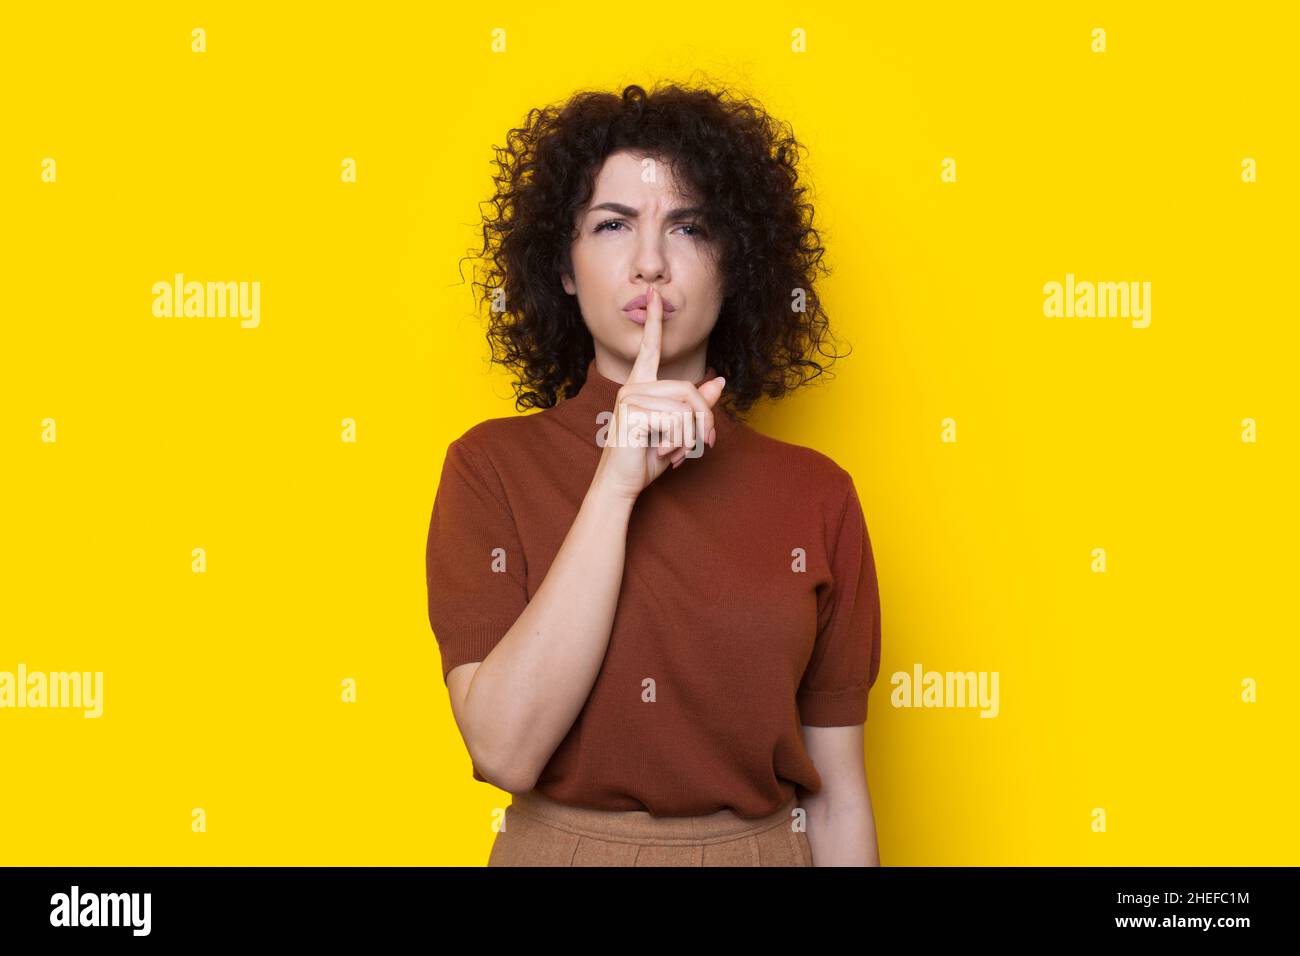 Portrait of serious woman showing silence gesture with finger over lips isolated over yellow background. Shh sign. Curly hair. Stock Photo